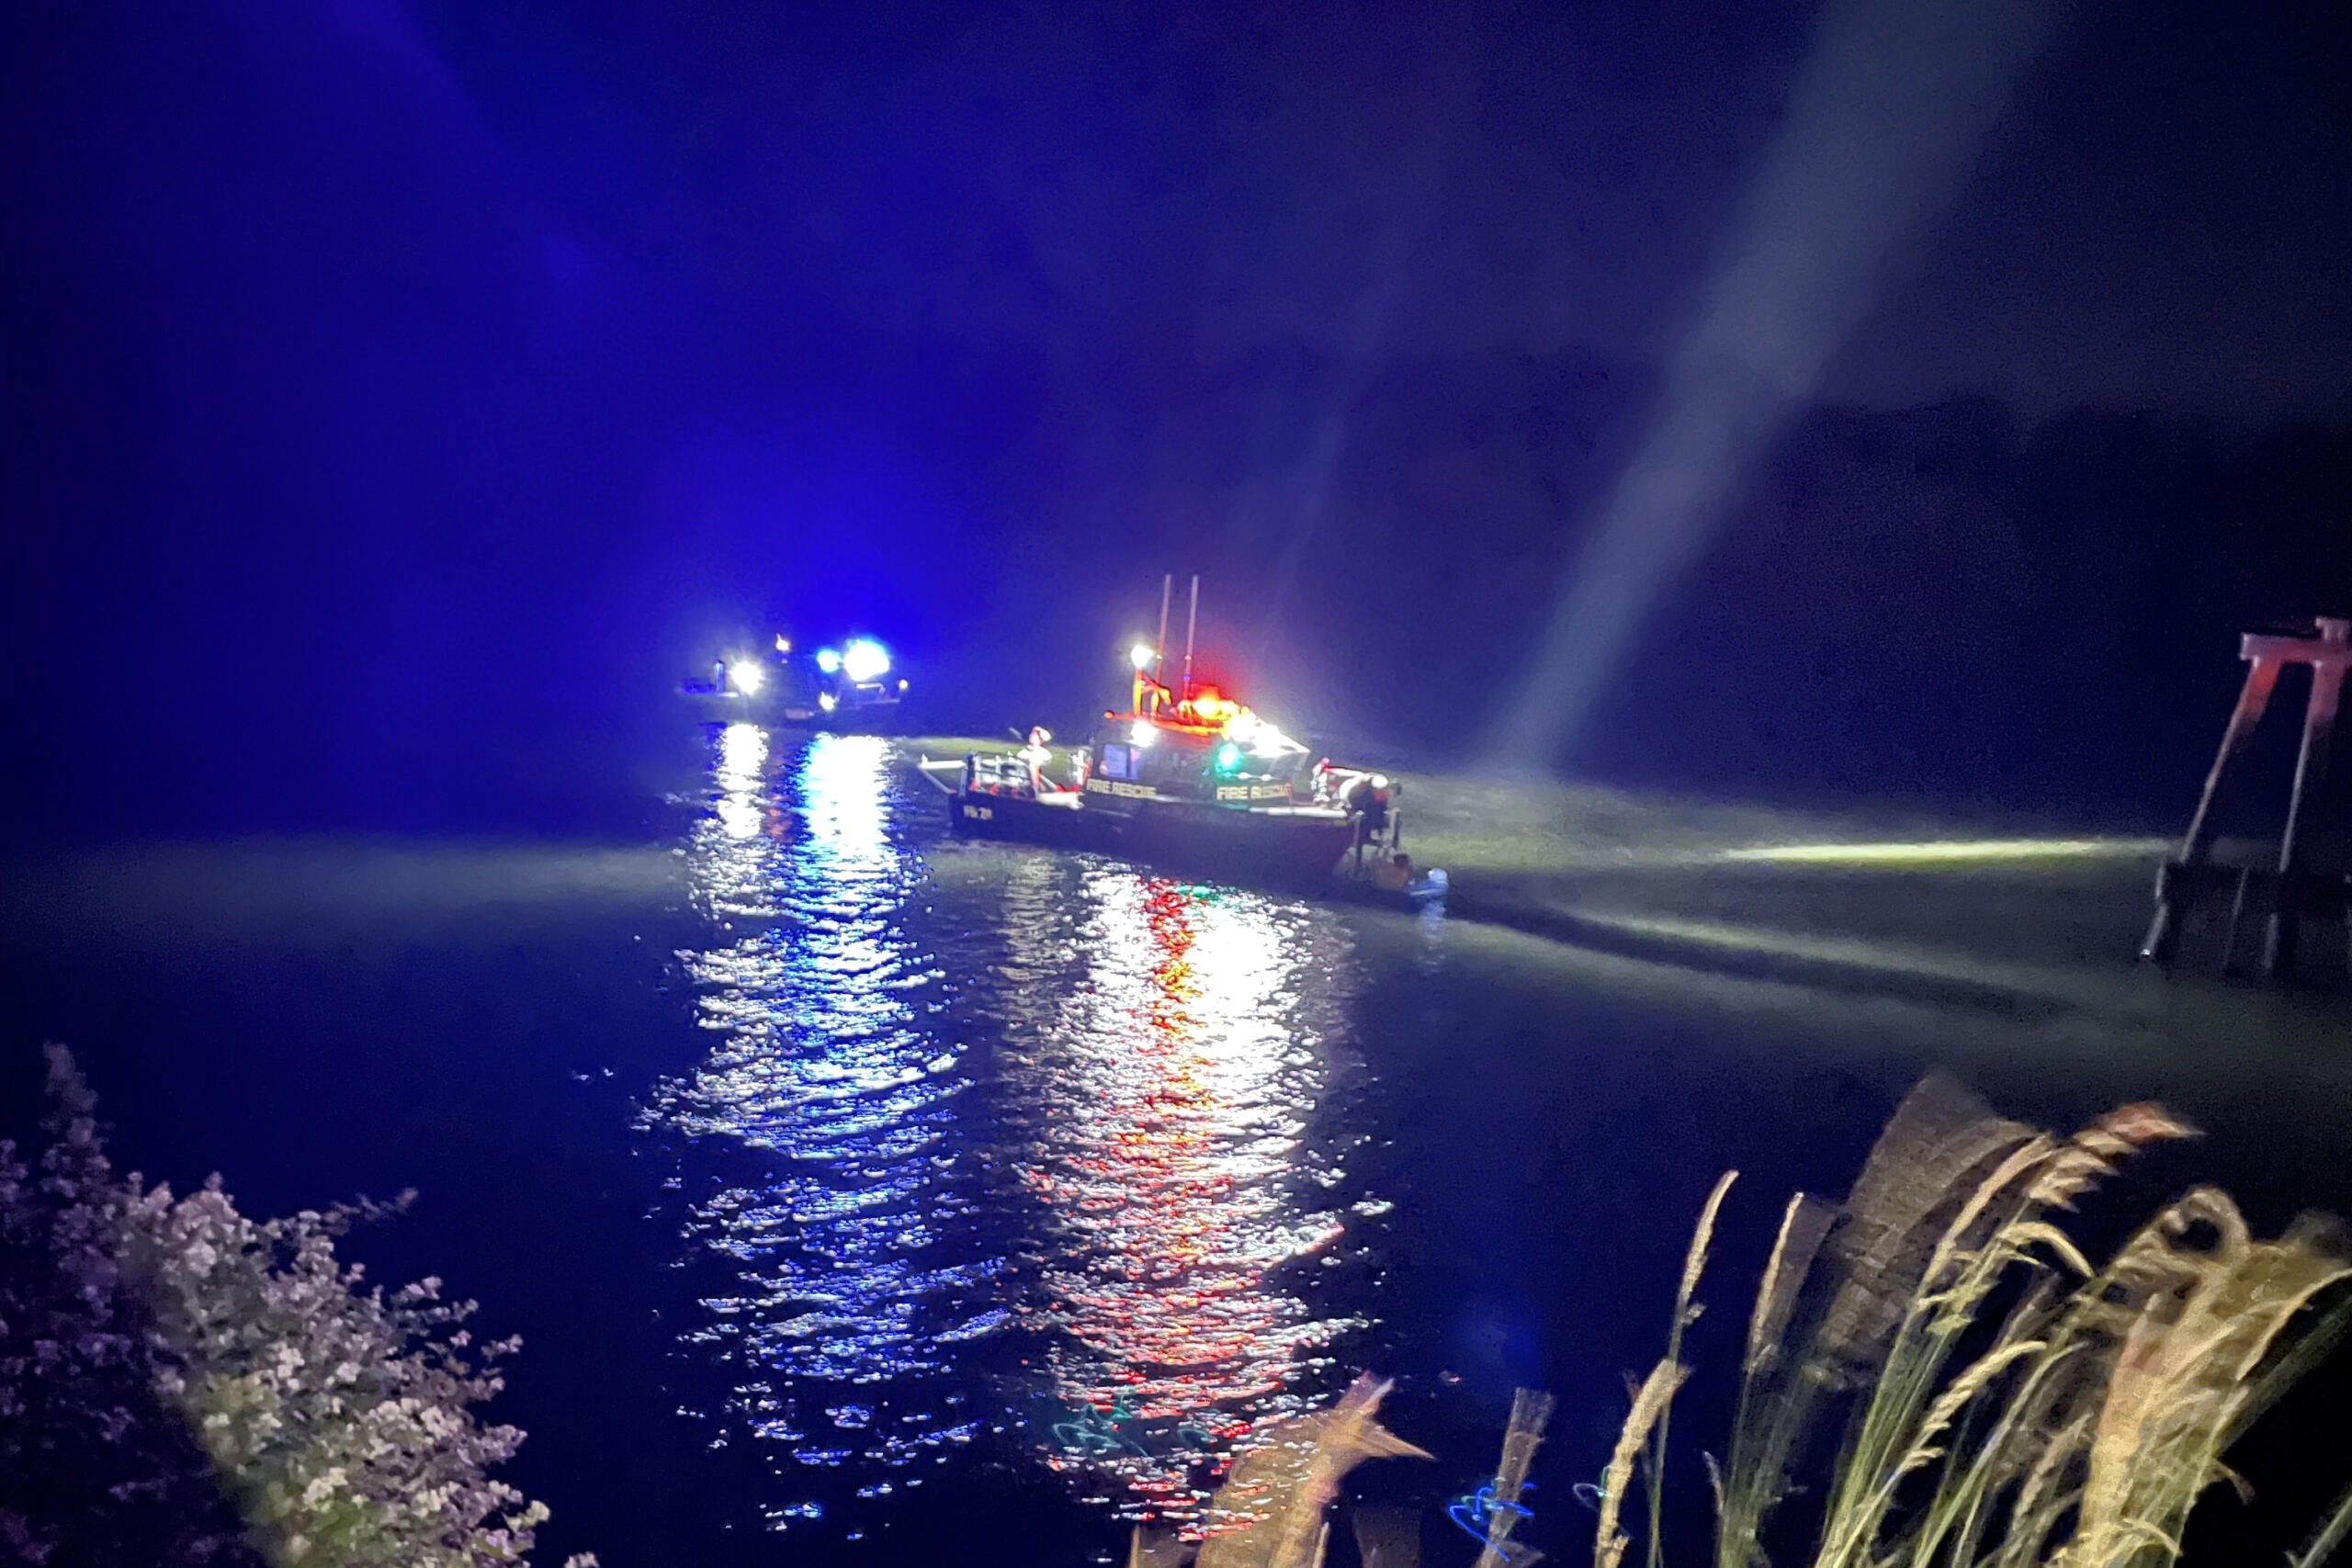 A man and a woman were rescued Monday night from the Columbia River, just inside the Multnomah Channel, after their inner tubes popped while they were in the water. Neither were injured, and both were wearing life jackets.